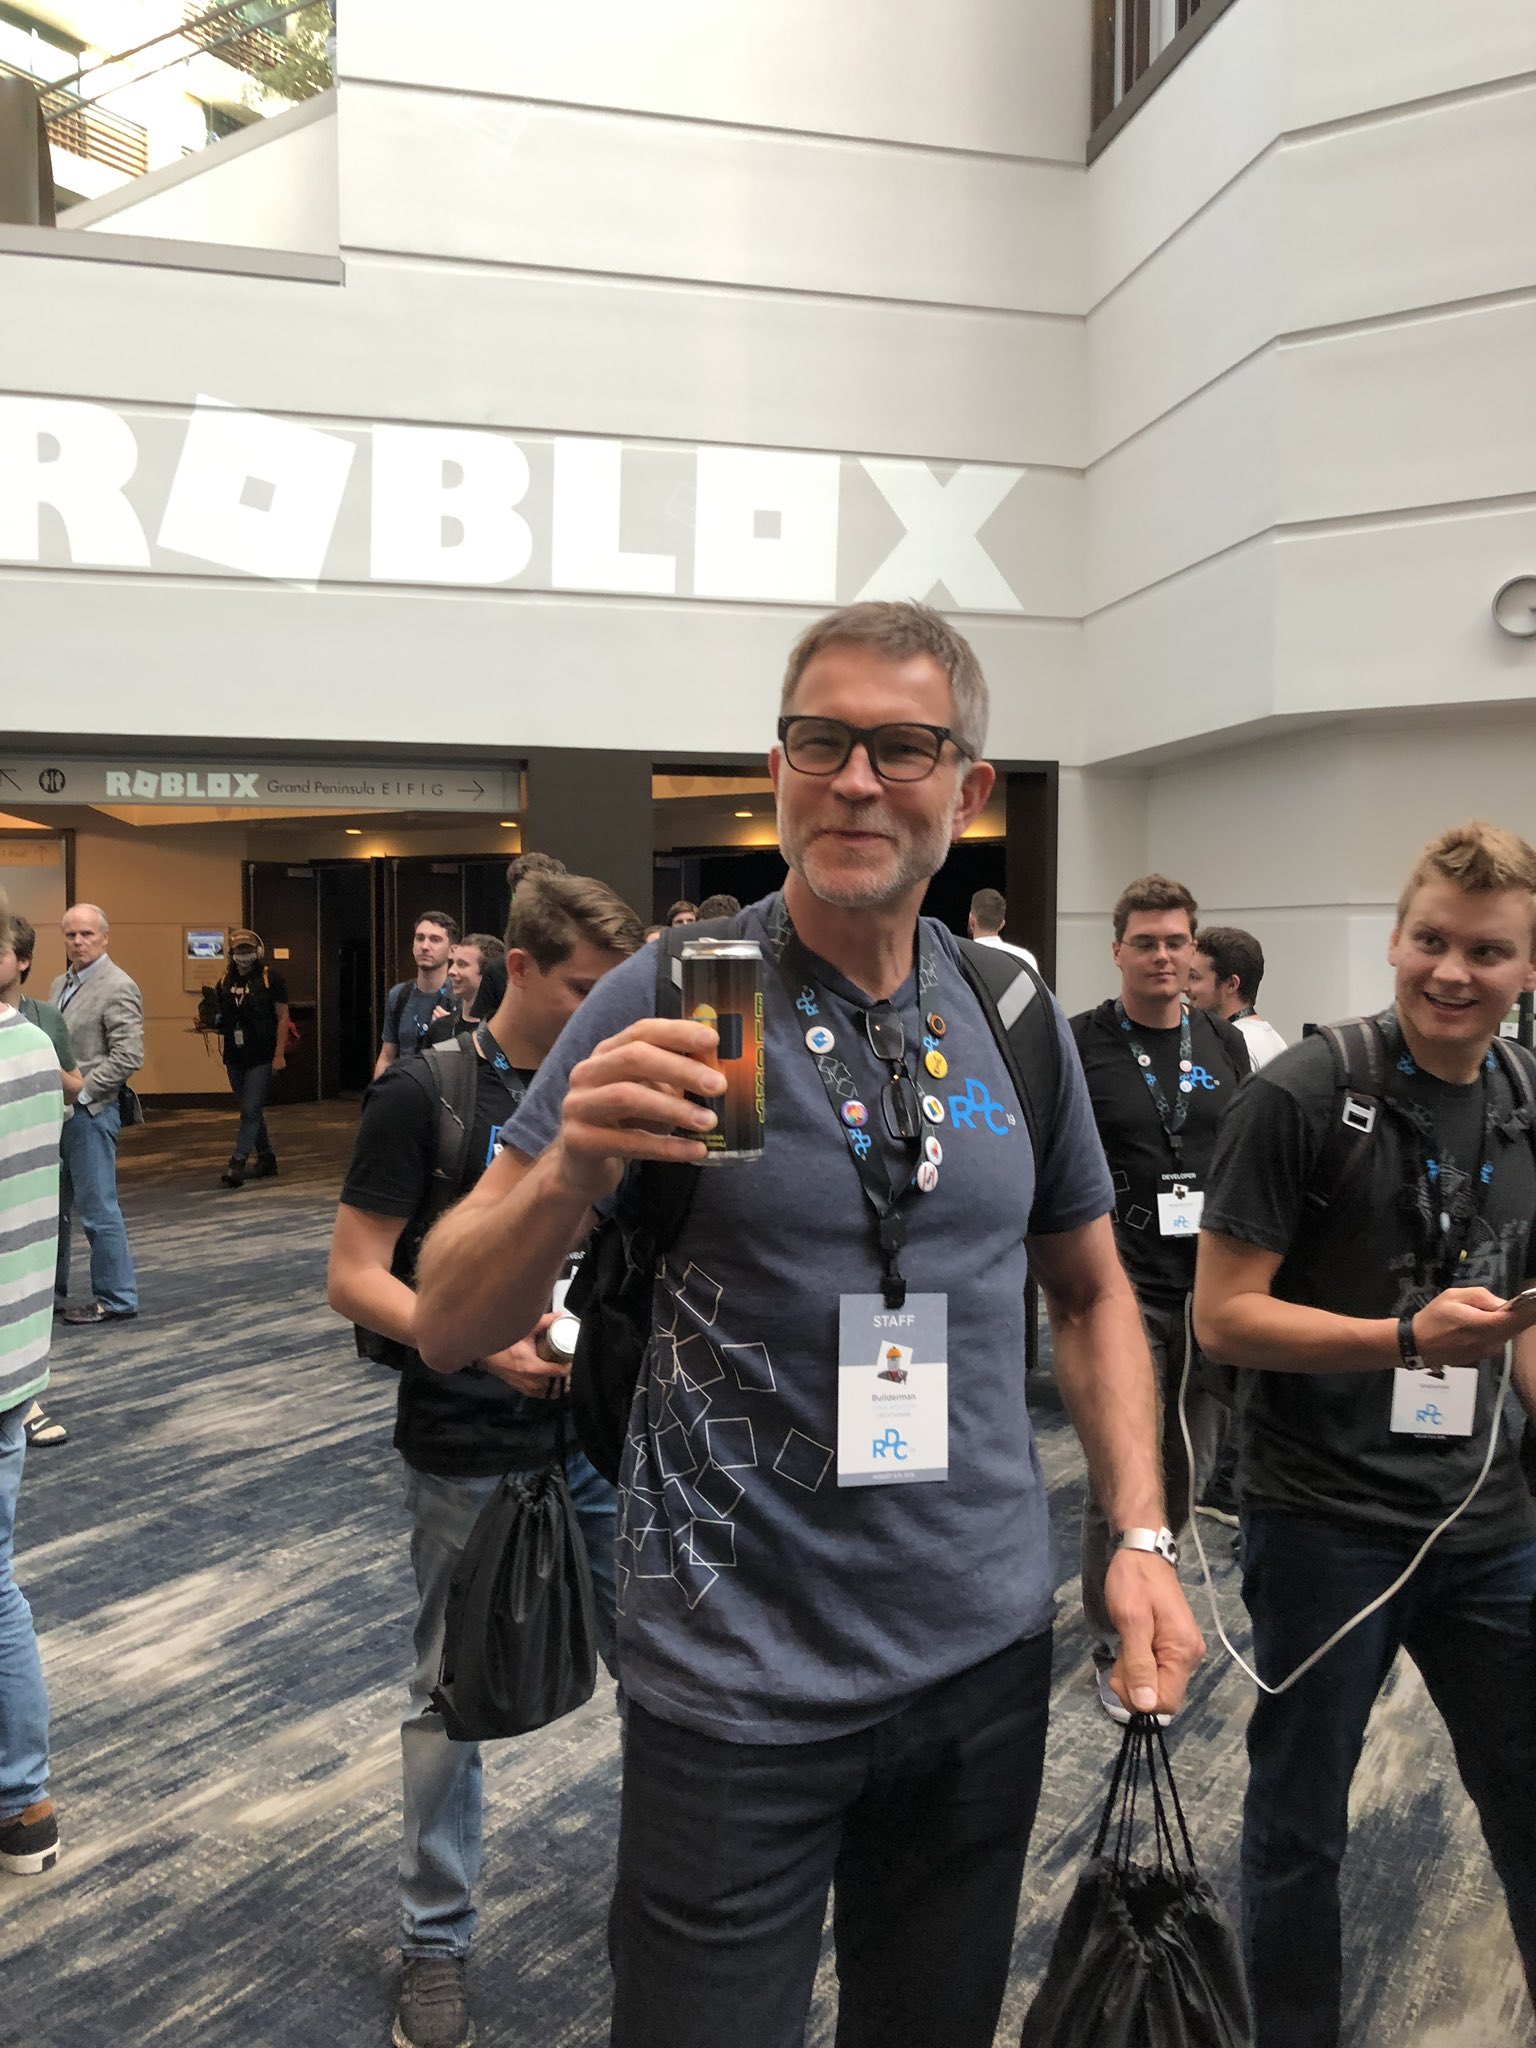 Emilybendsspace On Twitter Builderman Drinks A Bloxy Cola For The First Time Ever Irl Rdc2019 - roblox and builderman in real life